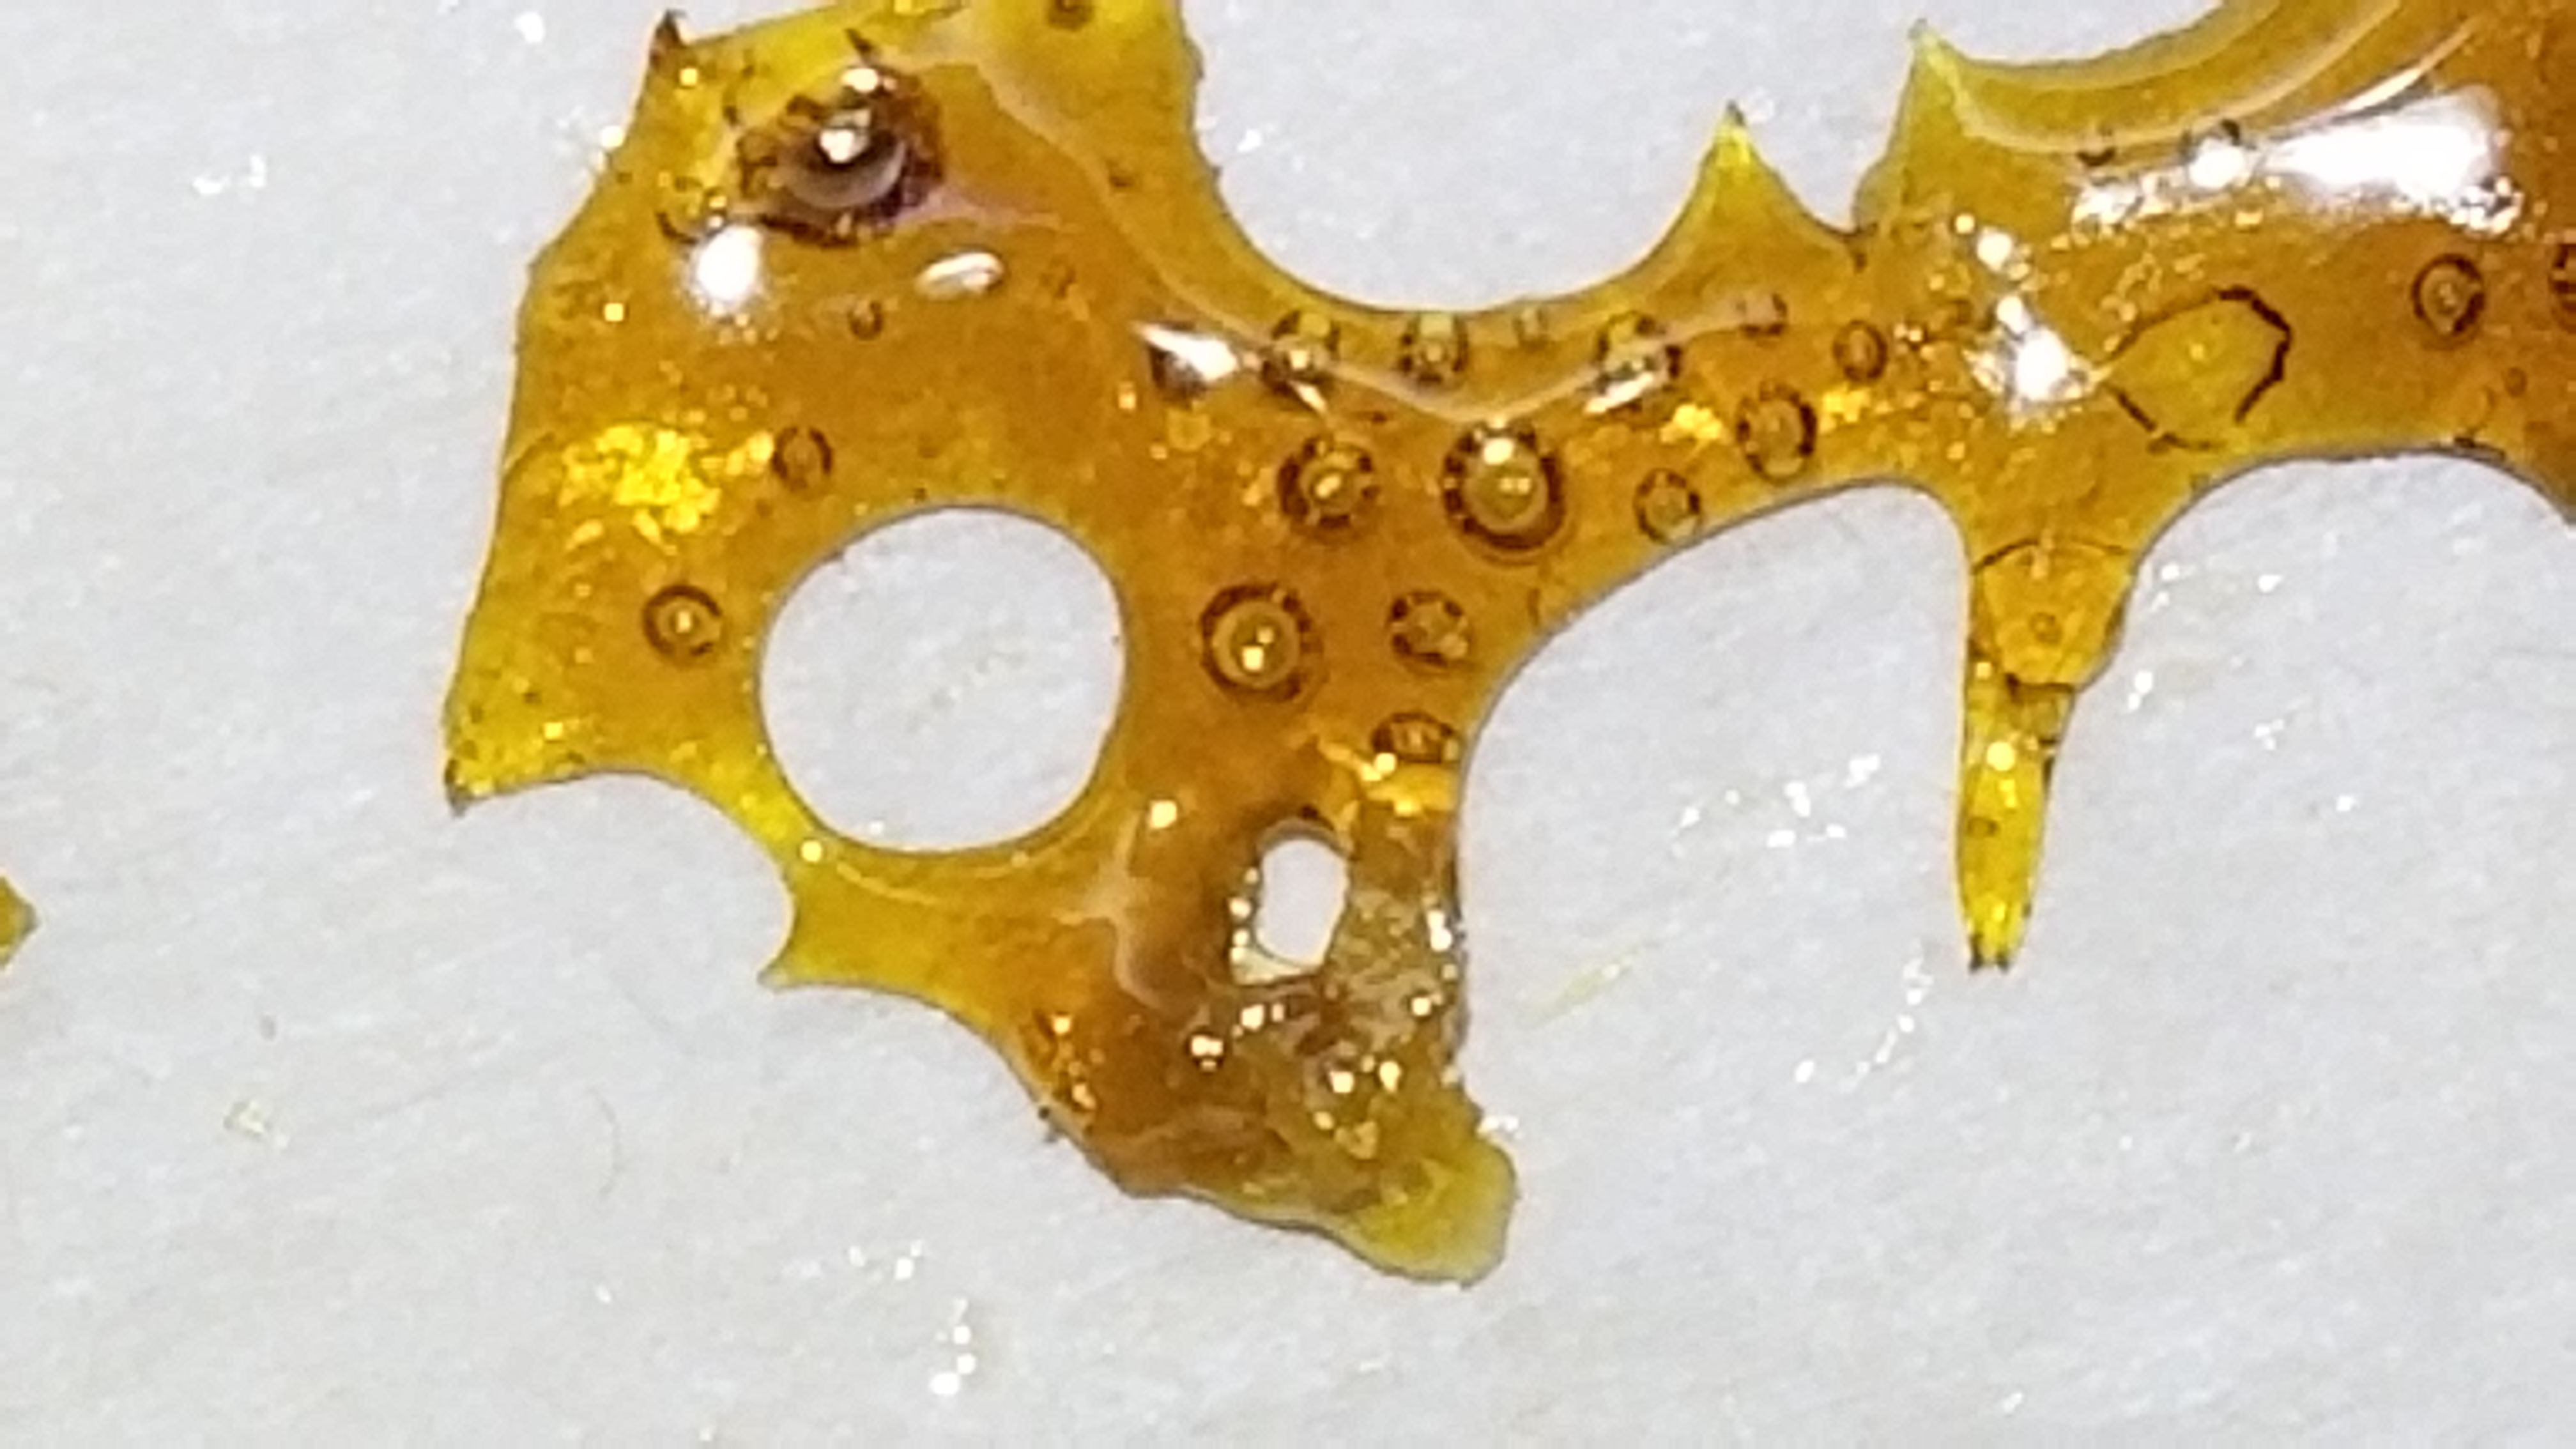 Turning to not shatter 3